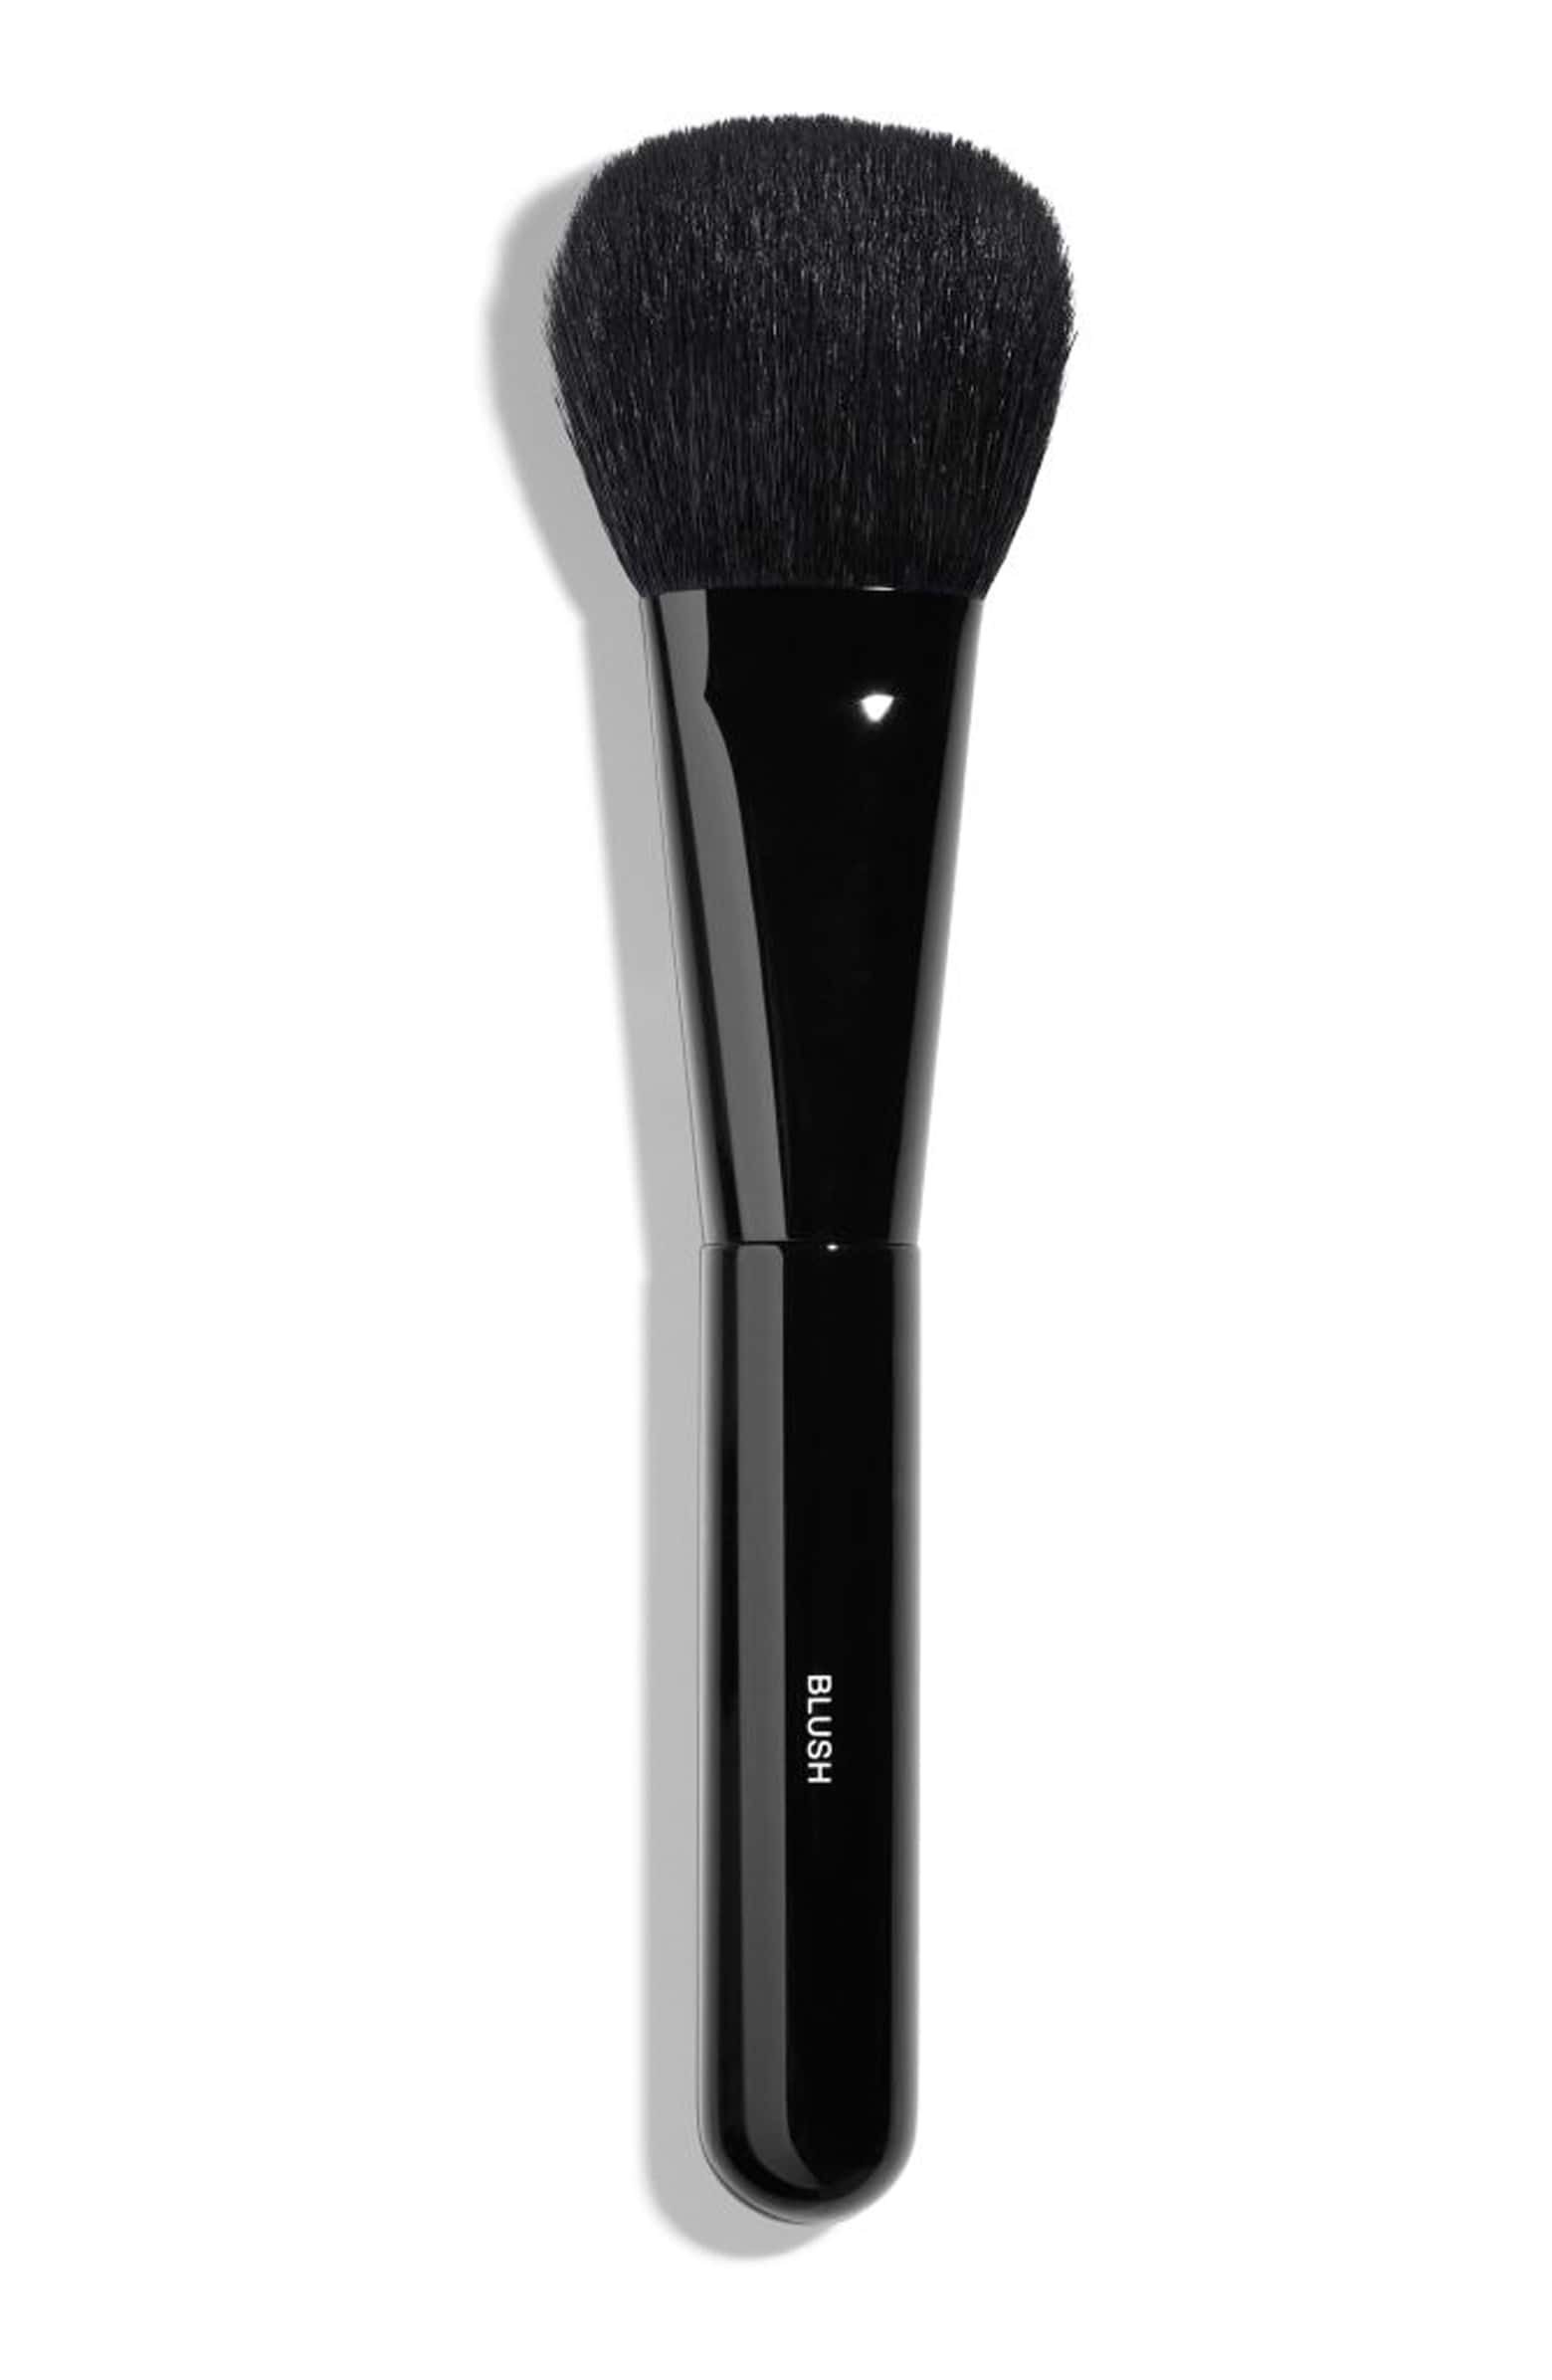 How to clean makeup brushes: Chanel Pinceau Blush Blush Brush